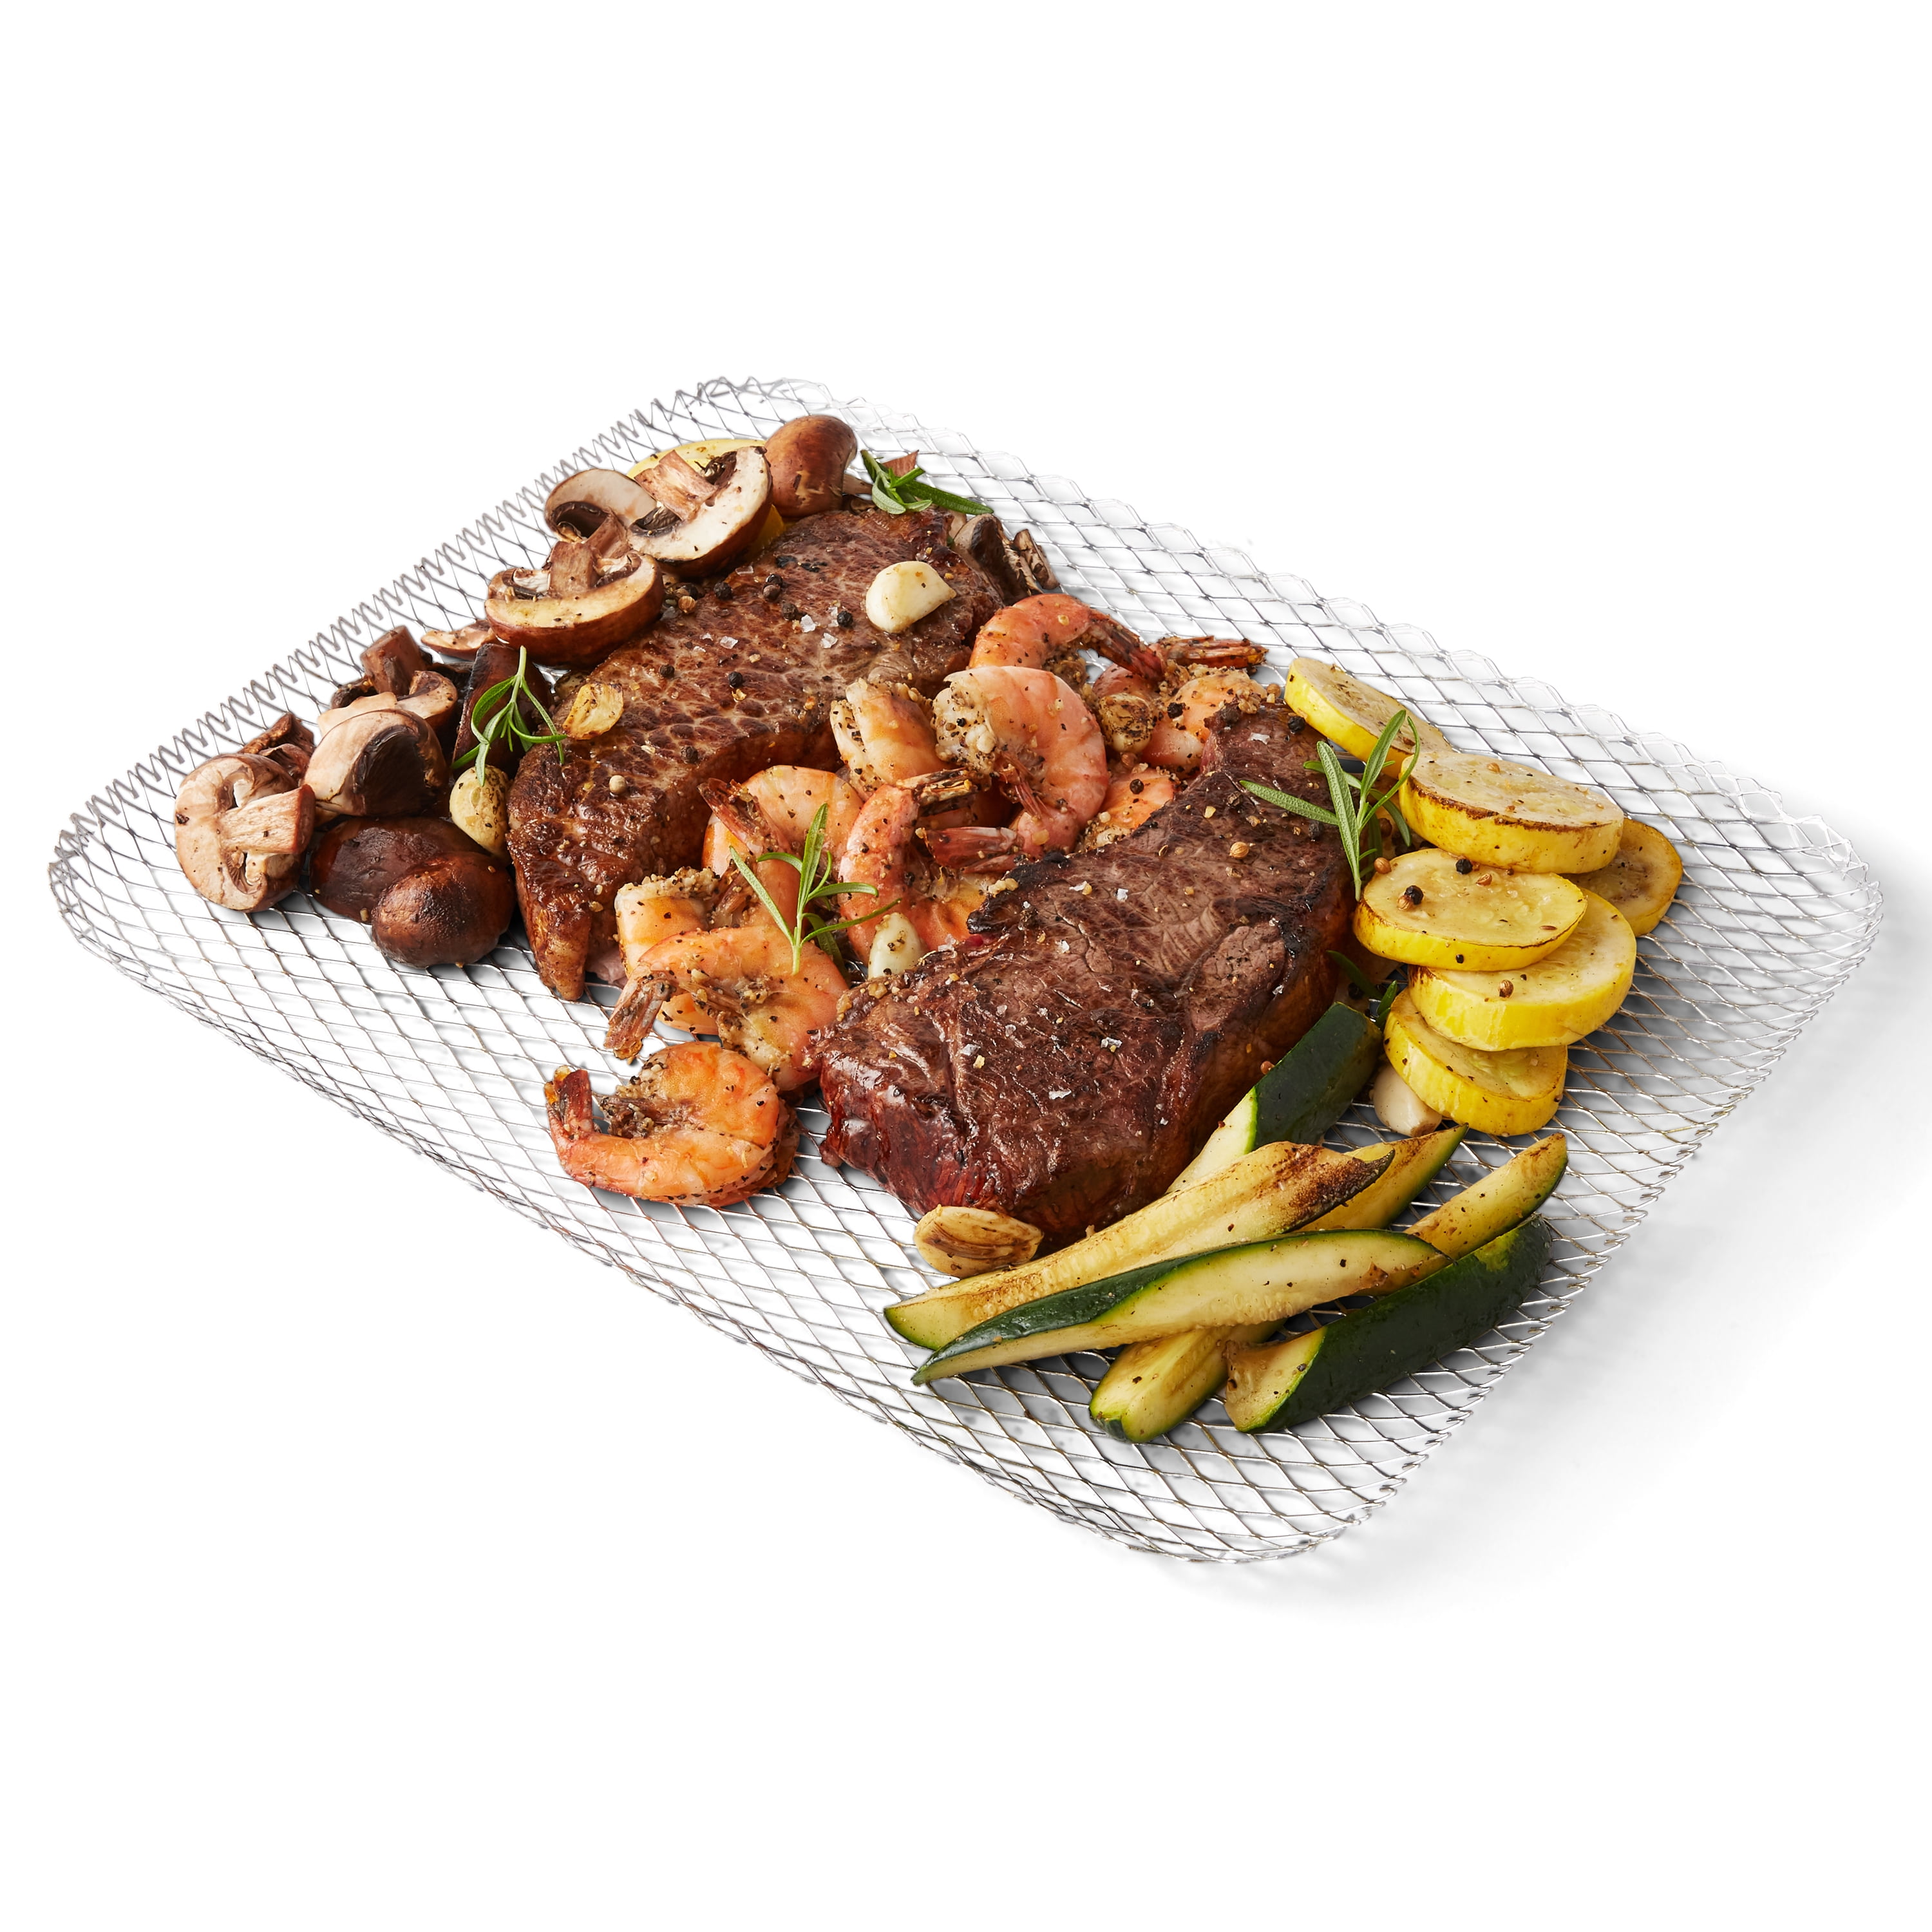 Expert Grill Porcelain Grill Topper, 16 x 12